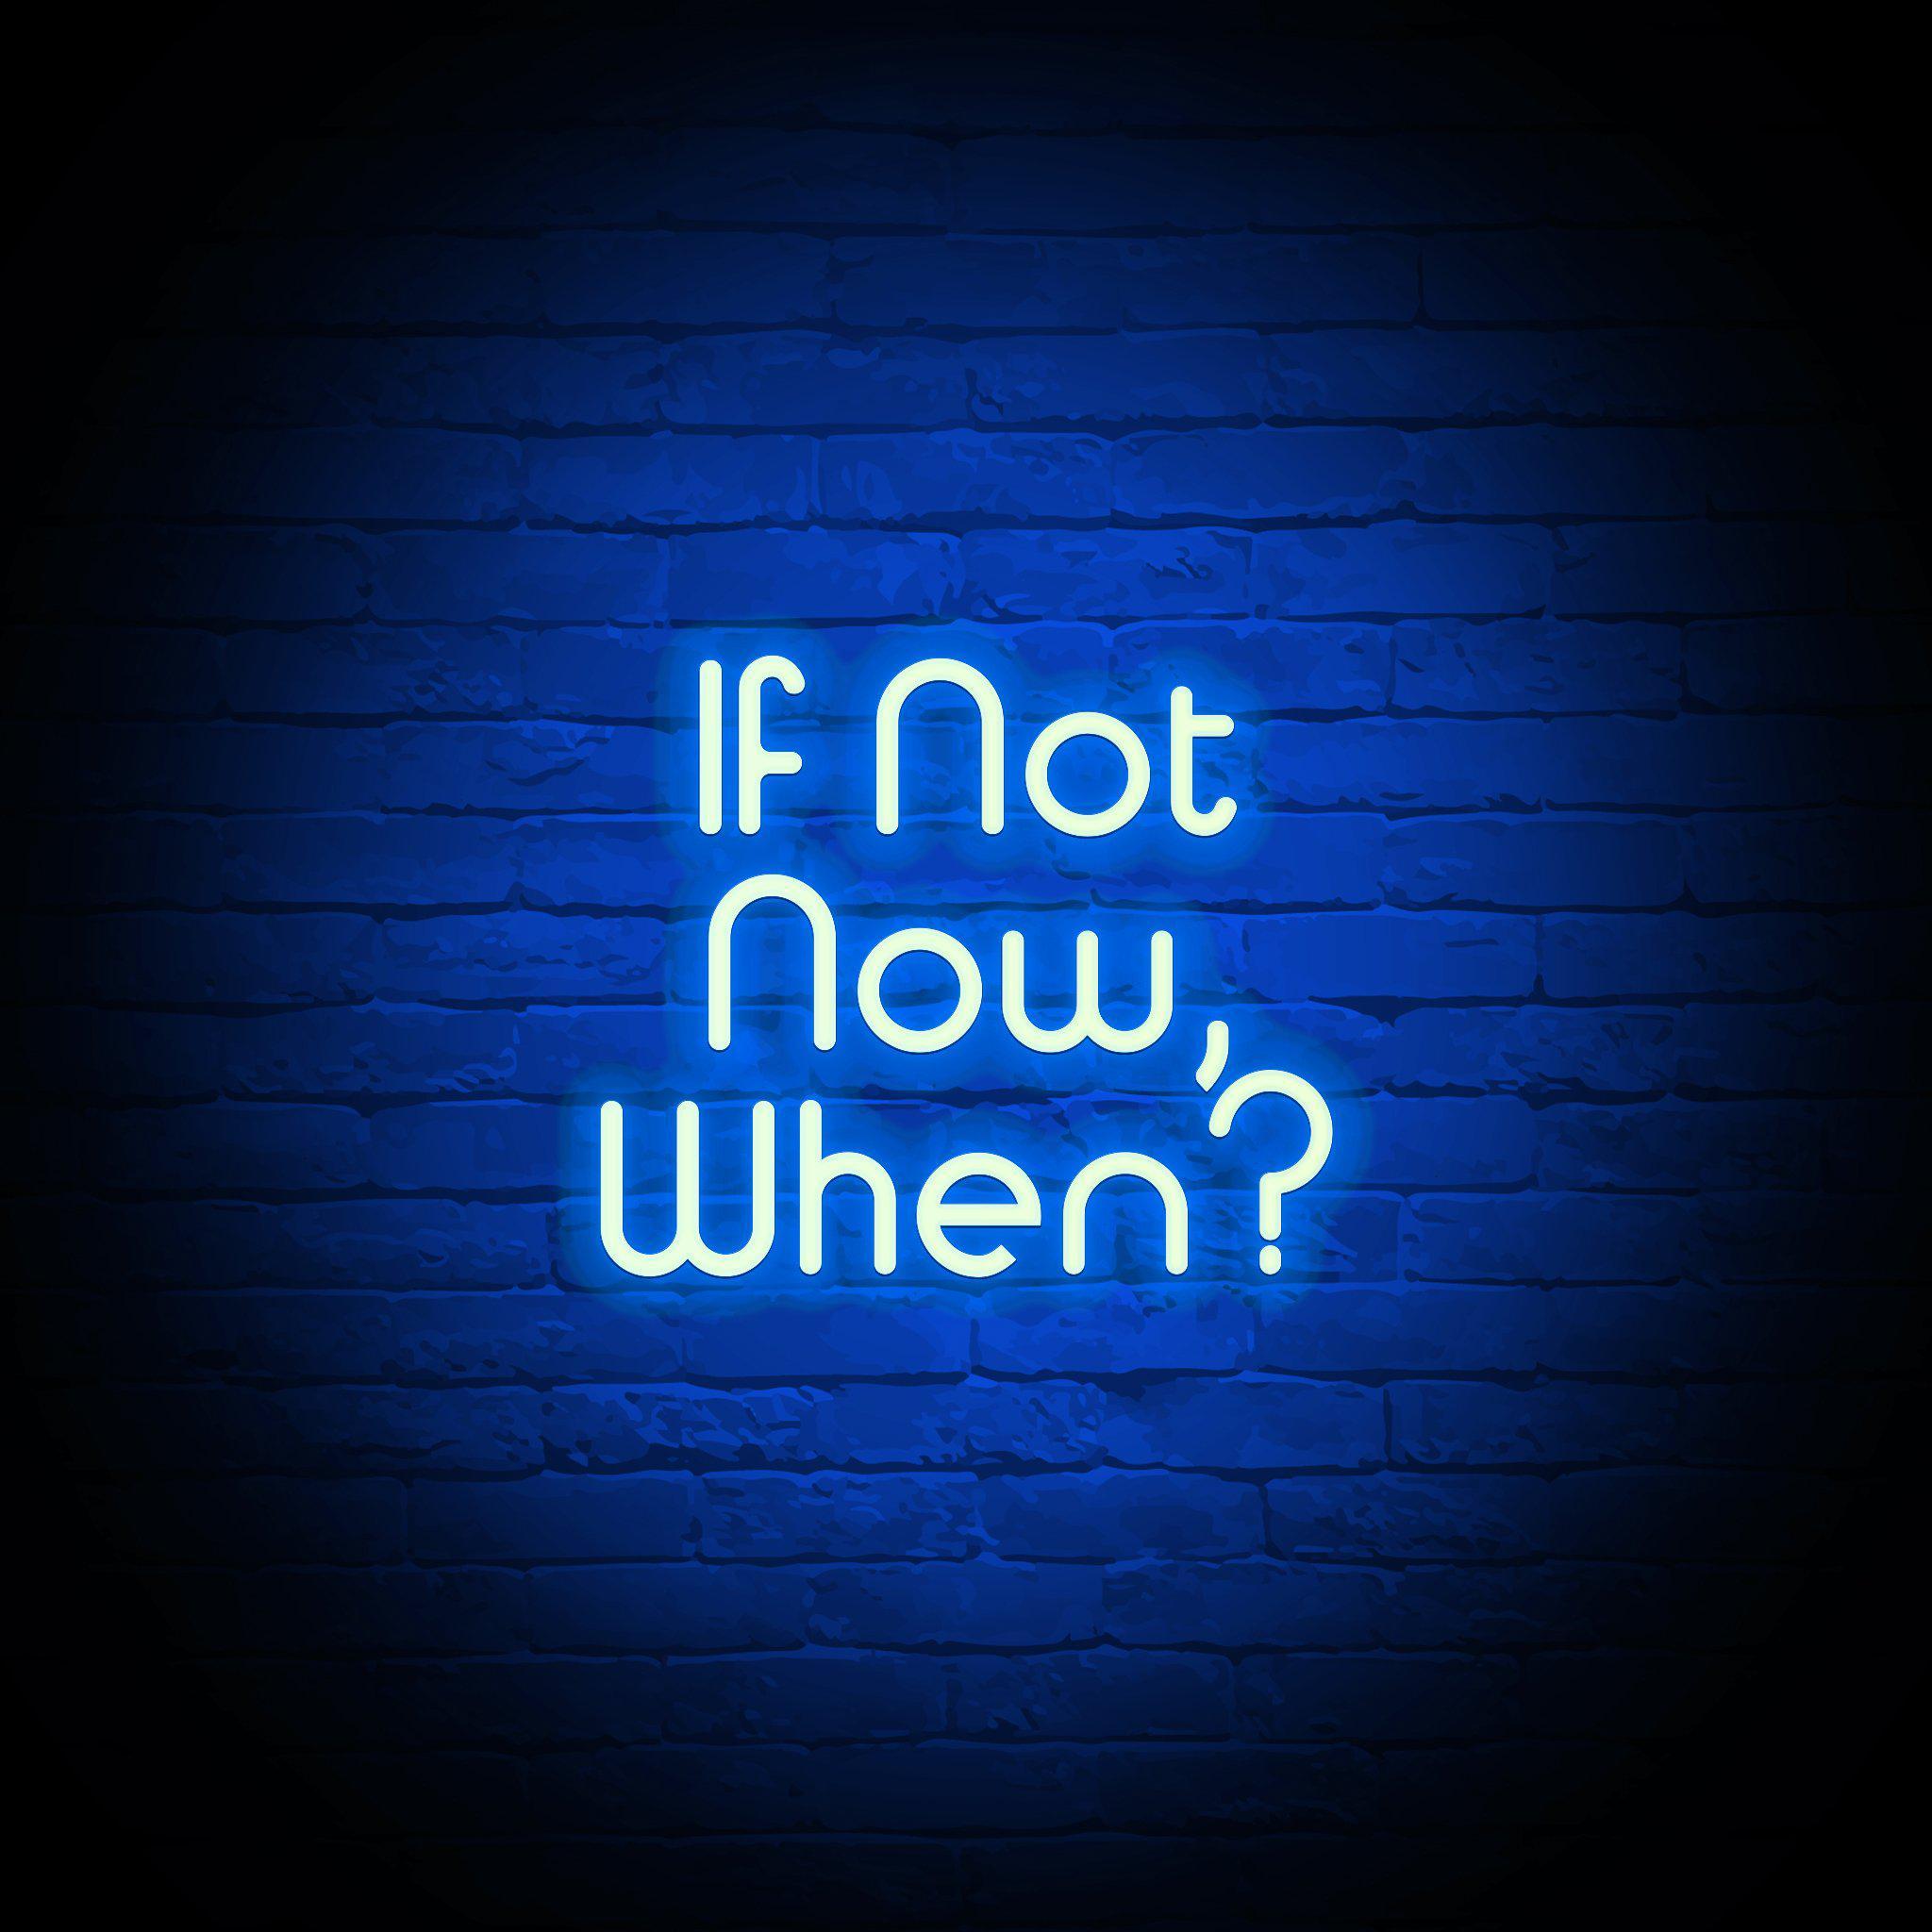 'IF NOT NOW, WHEN?' NEON SIGN